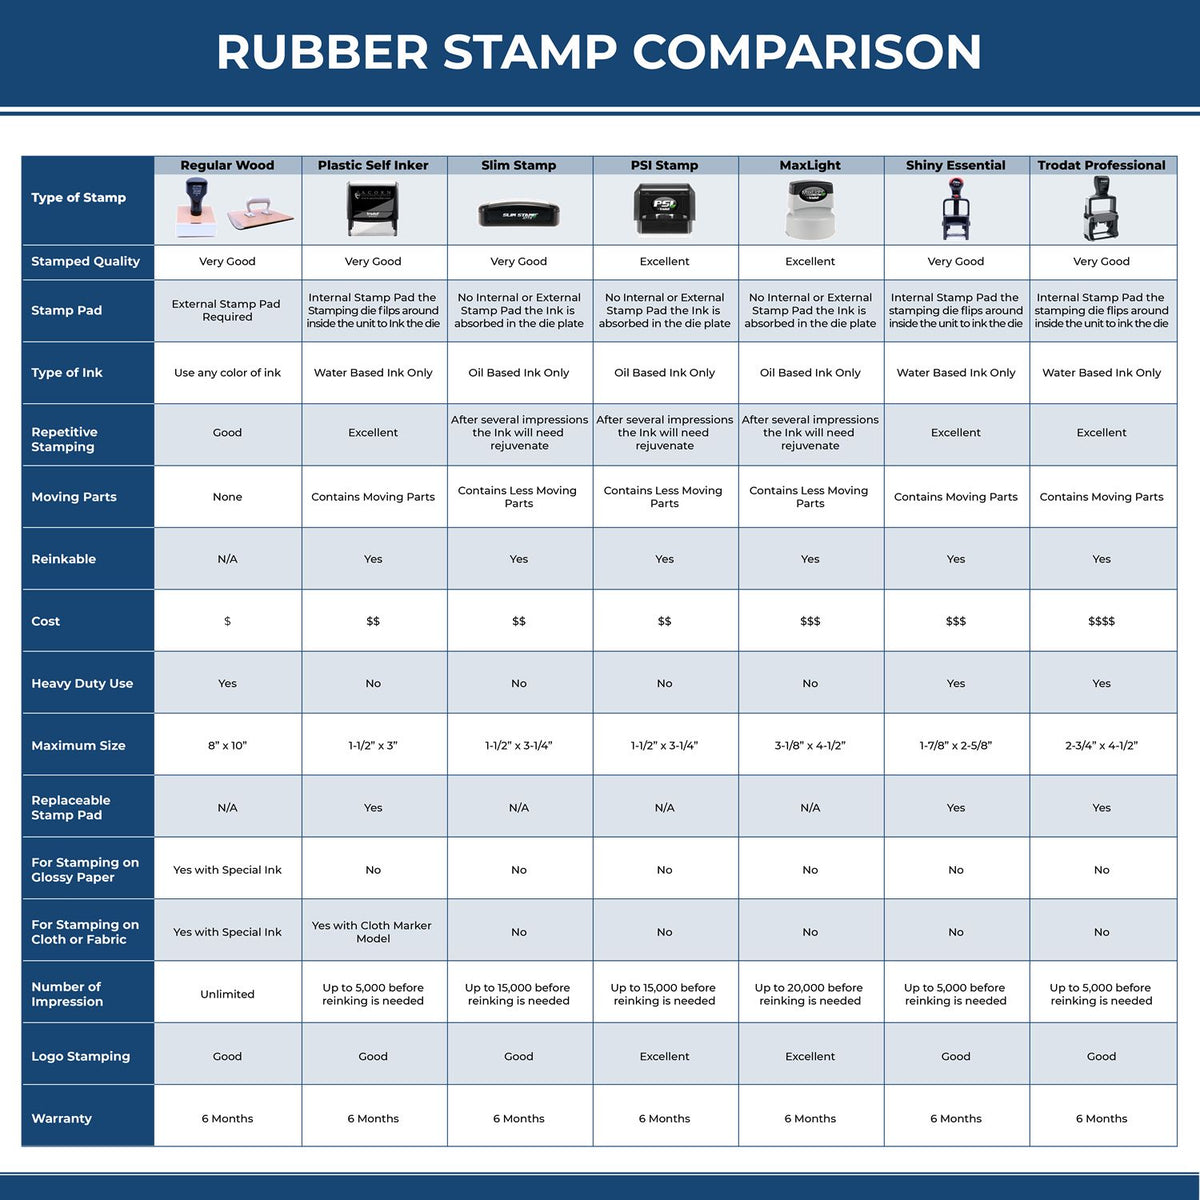 Large Pre-Inked Additional Postage Required Stamp 4873SLIM Rubber Stamp Comparison